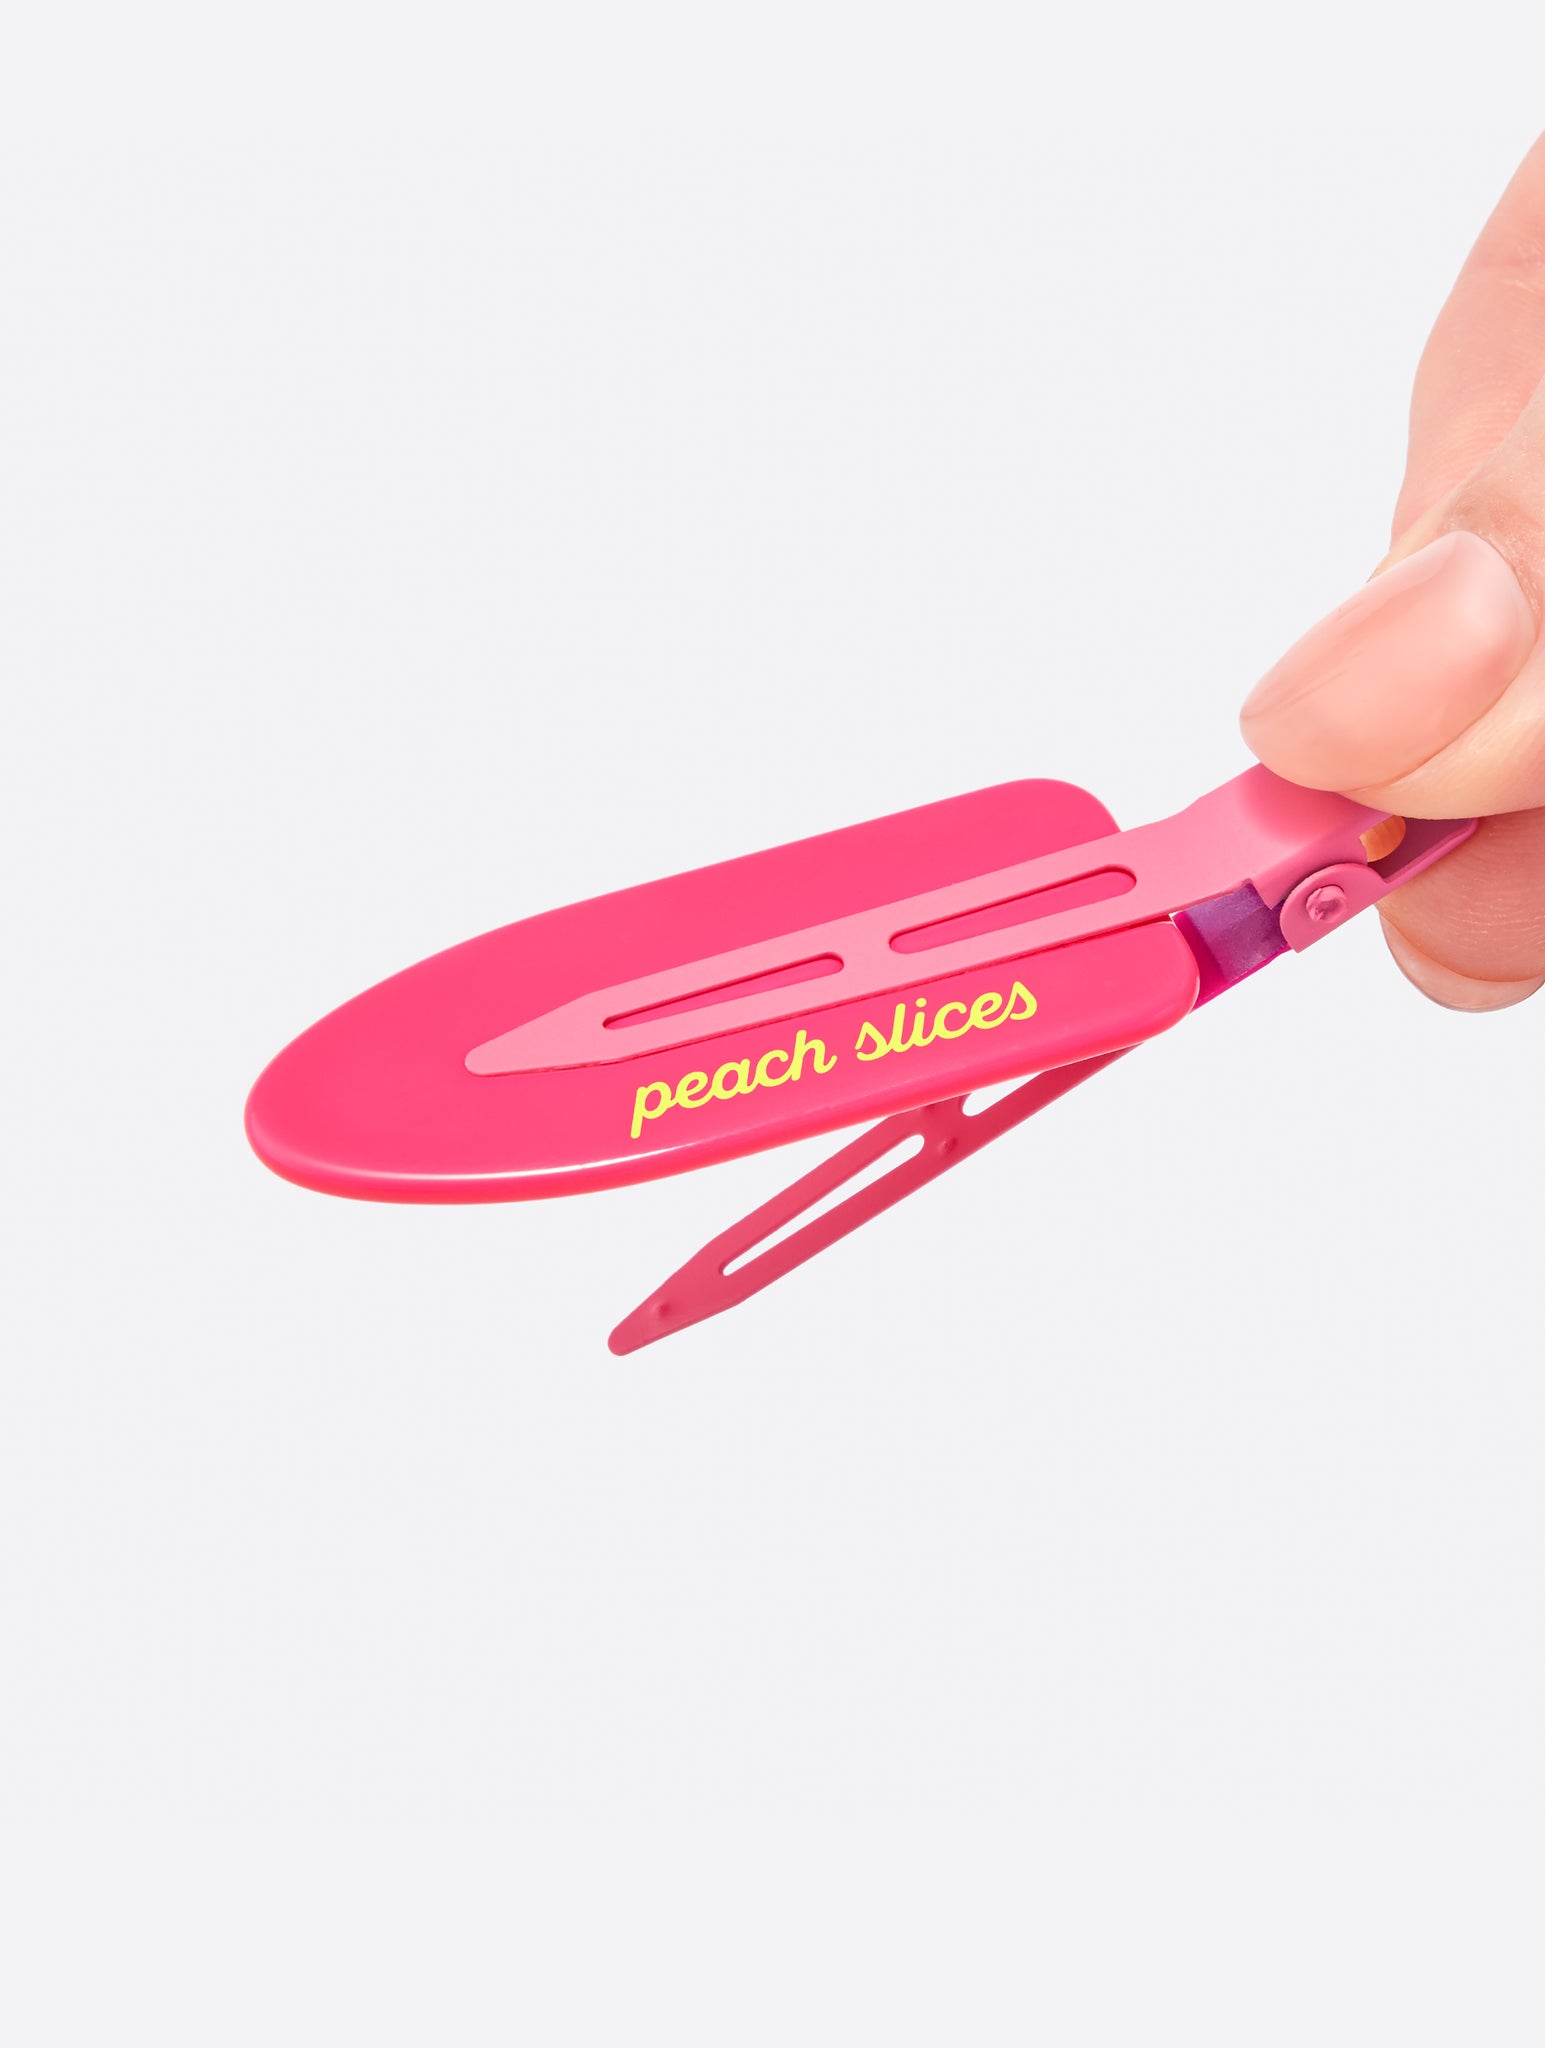 A close-up of a hand holding a pink Creaseless Hair Clip